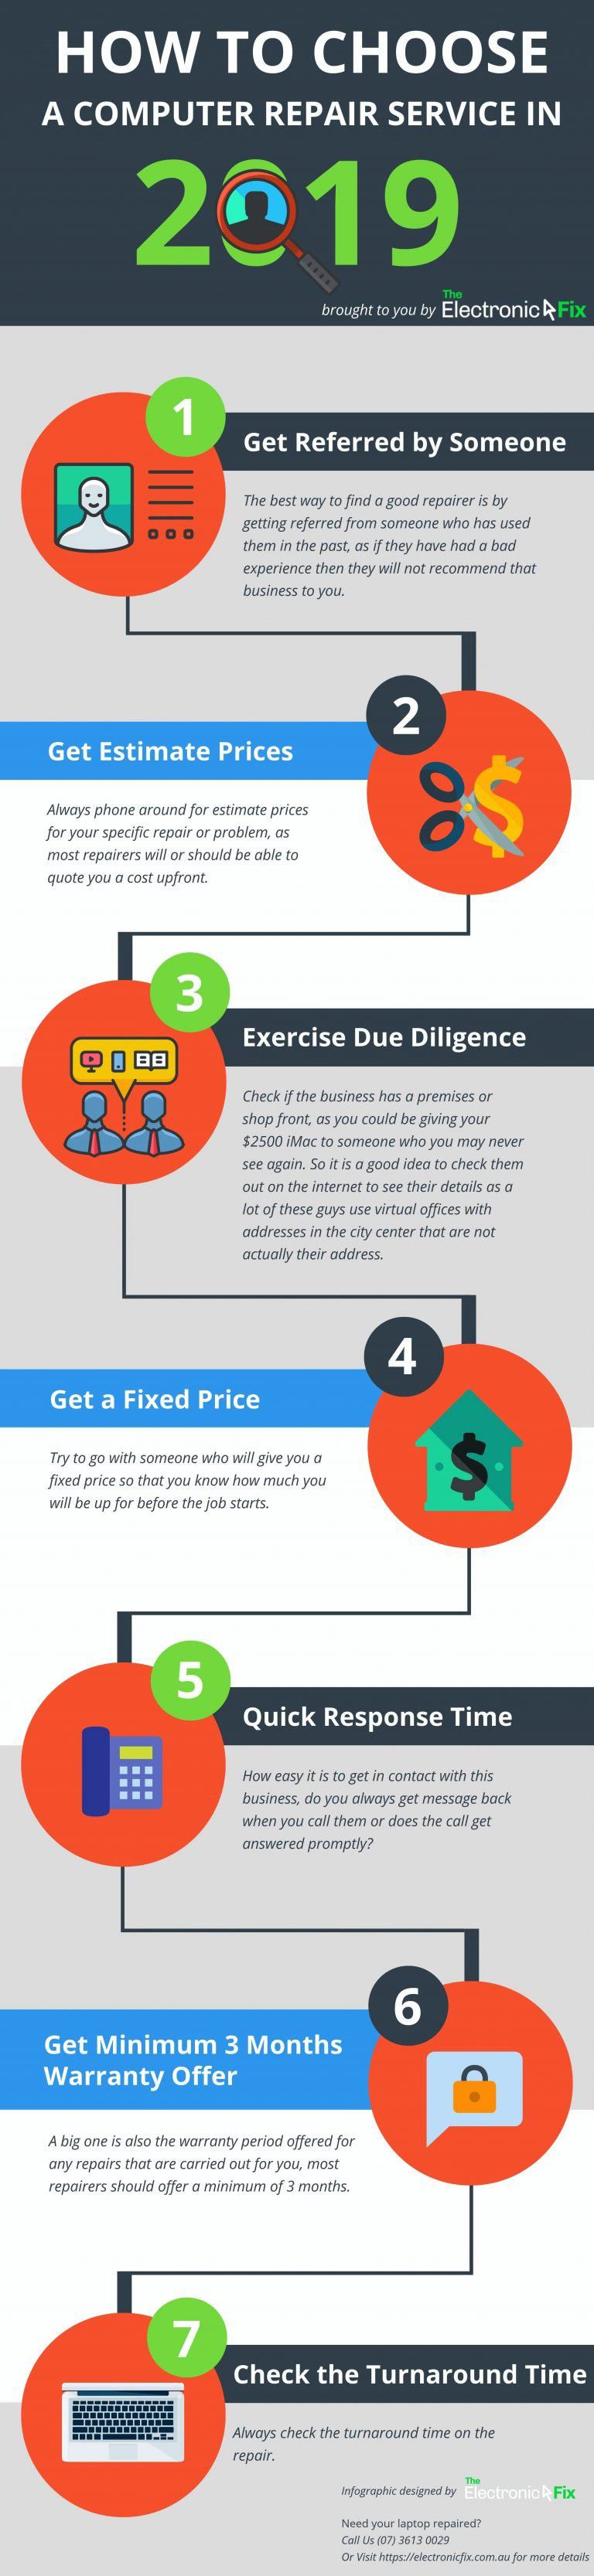 infographic explanation in 7 steps on how to choose a computer repair services in 2019